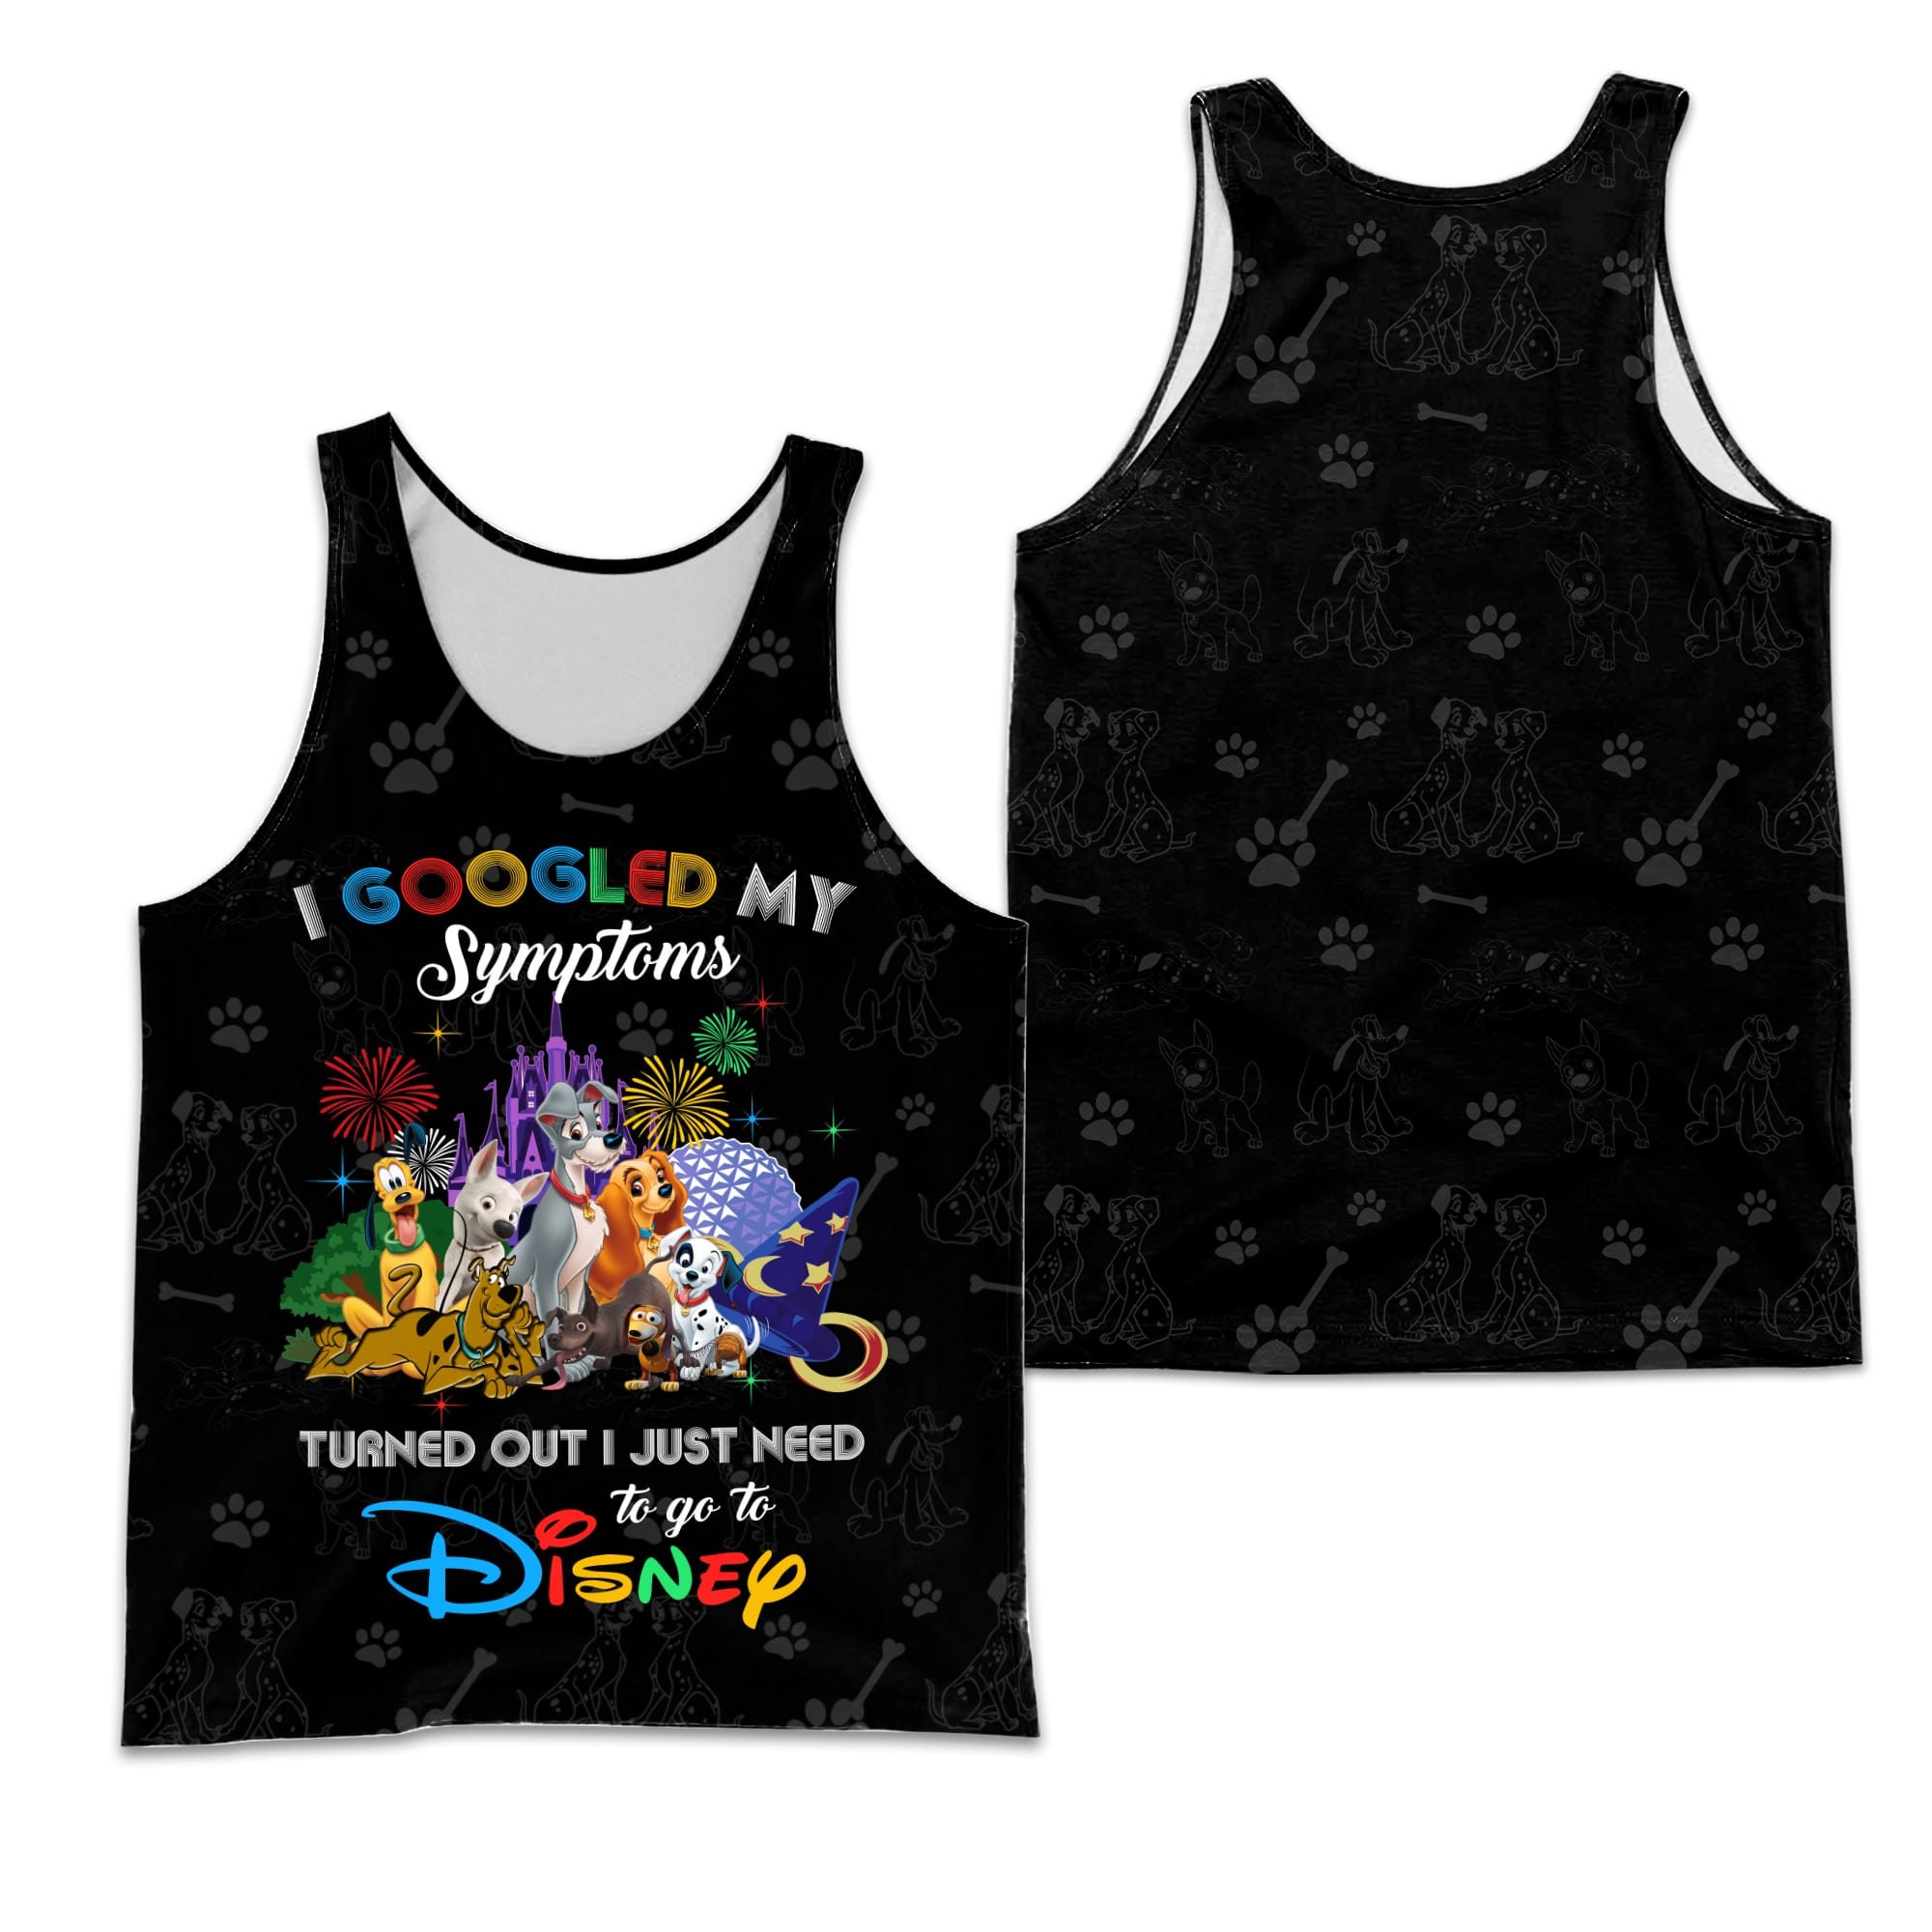 Discover Disney Dogs Google Funny Quote Black Disney 3D Tank Top